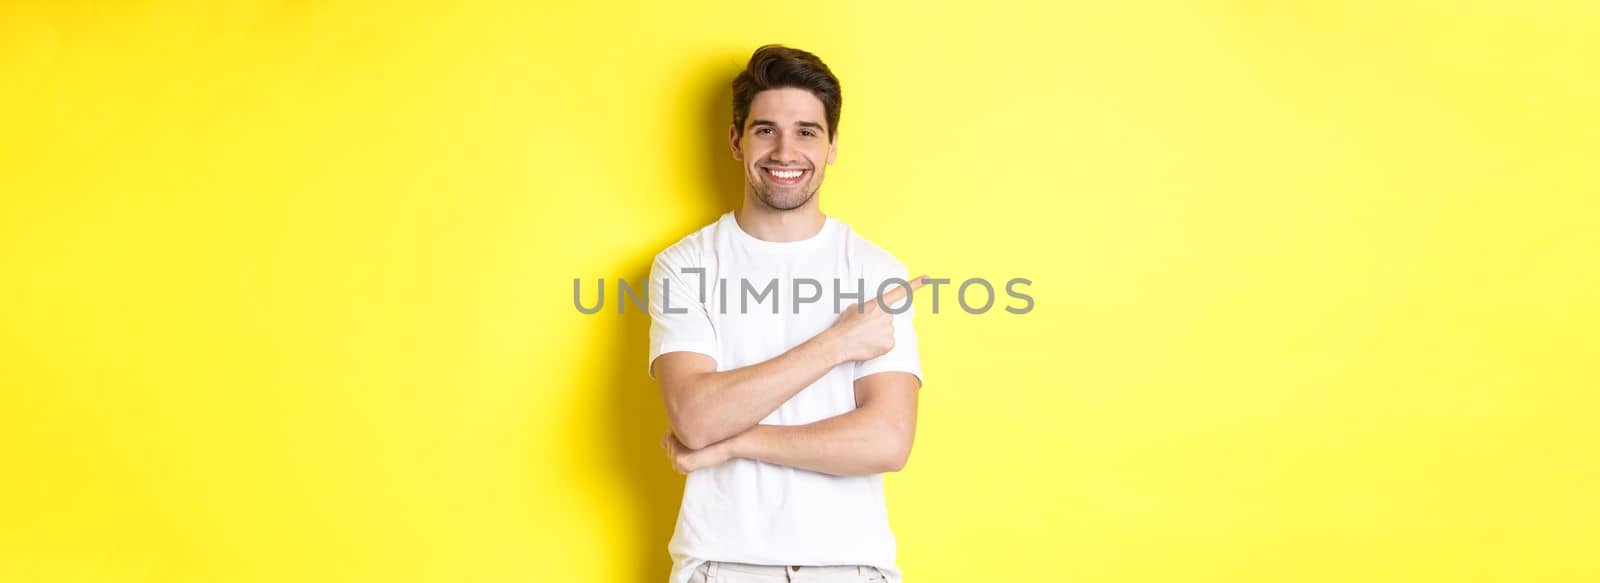 Handsome guy pointing left and smiling, showing advertisement on yellow copy space.